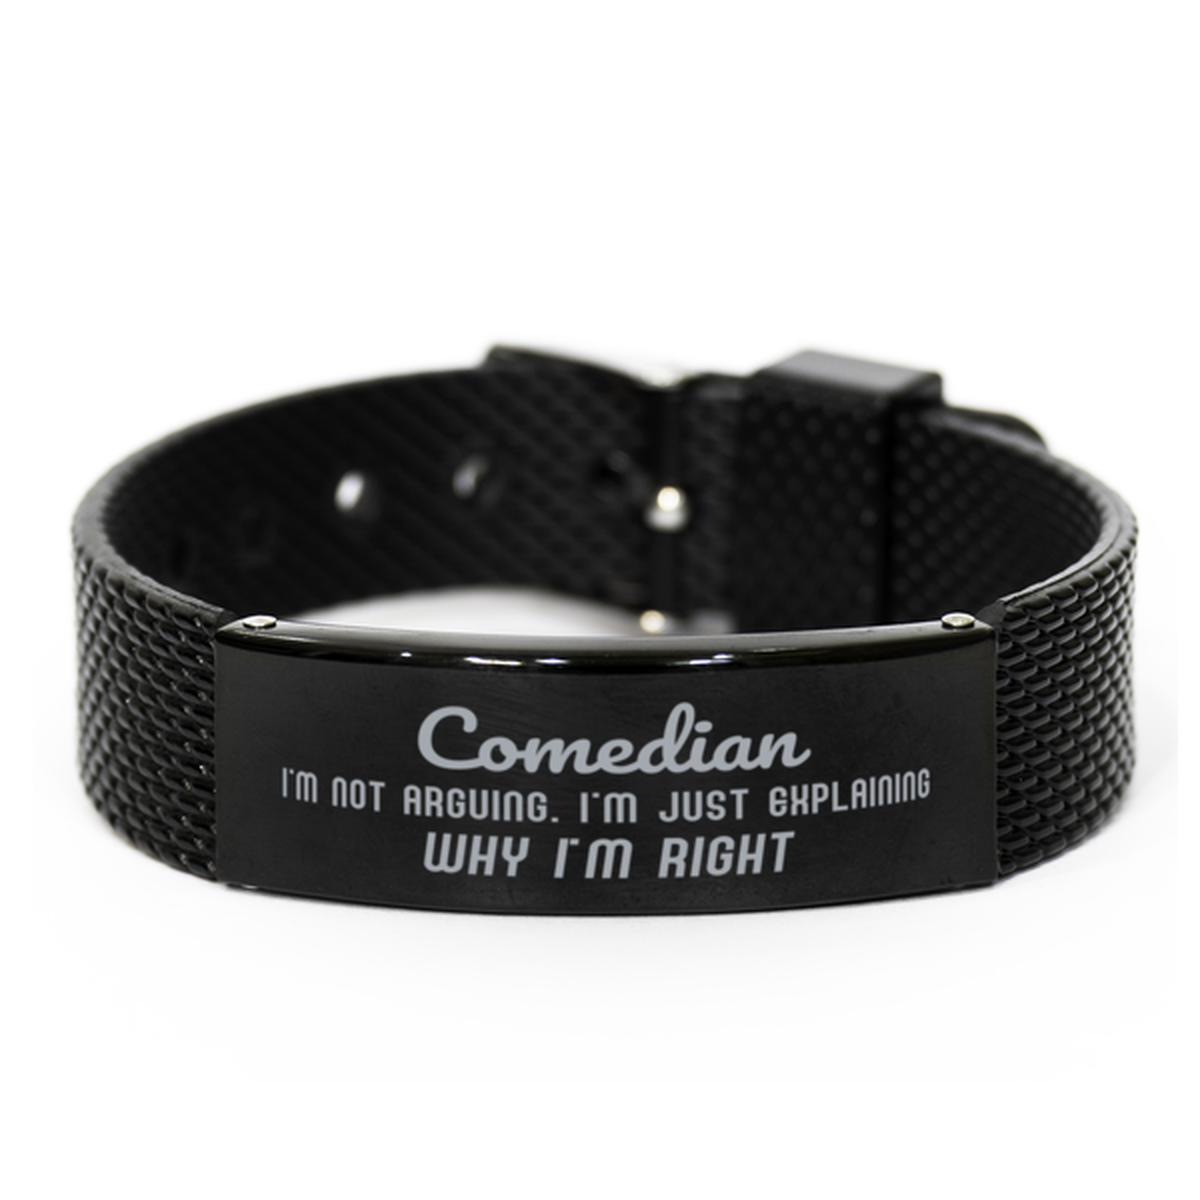 Comedian I'm not Arguing. I'm Just Explaining Why I'm RIGHT Black Shark Mesh Bracelet, Funny Saying Quote Comedian Gifts For Comedian Graduation Birthday Christmas Gifts for Men Women Coworker